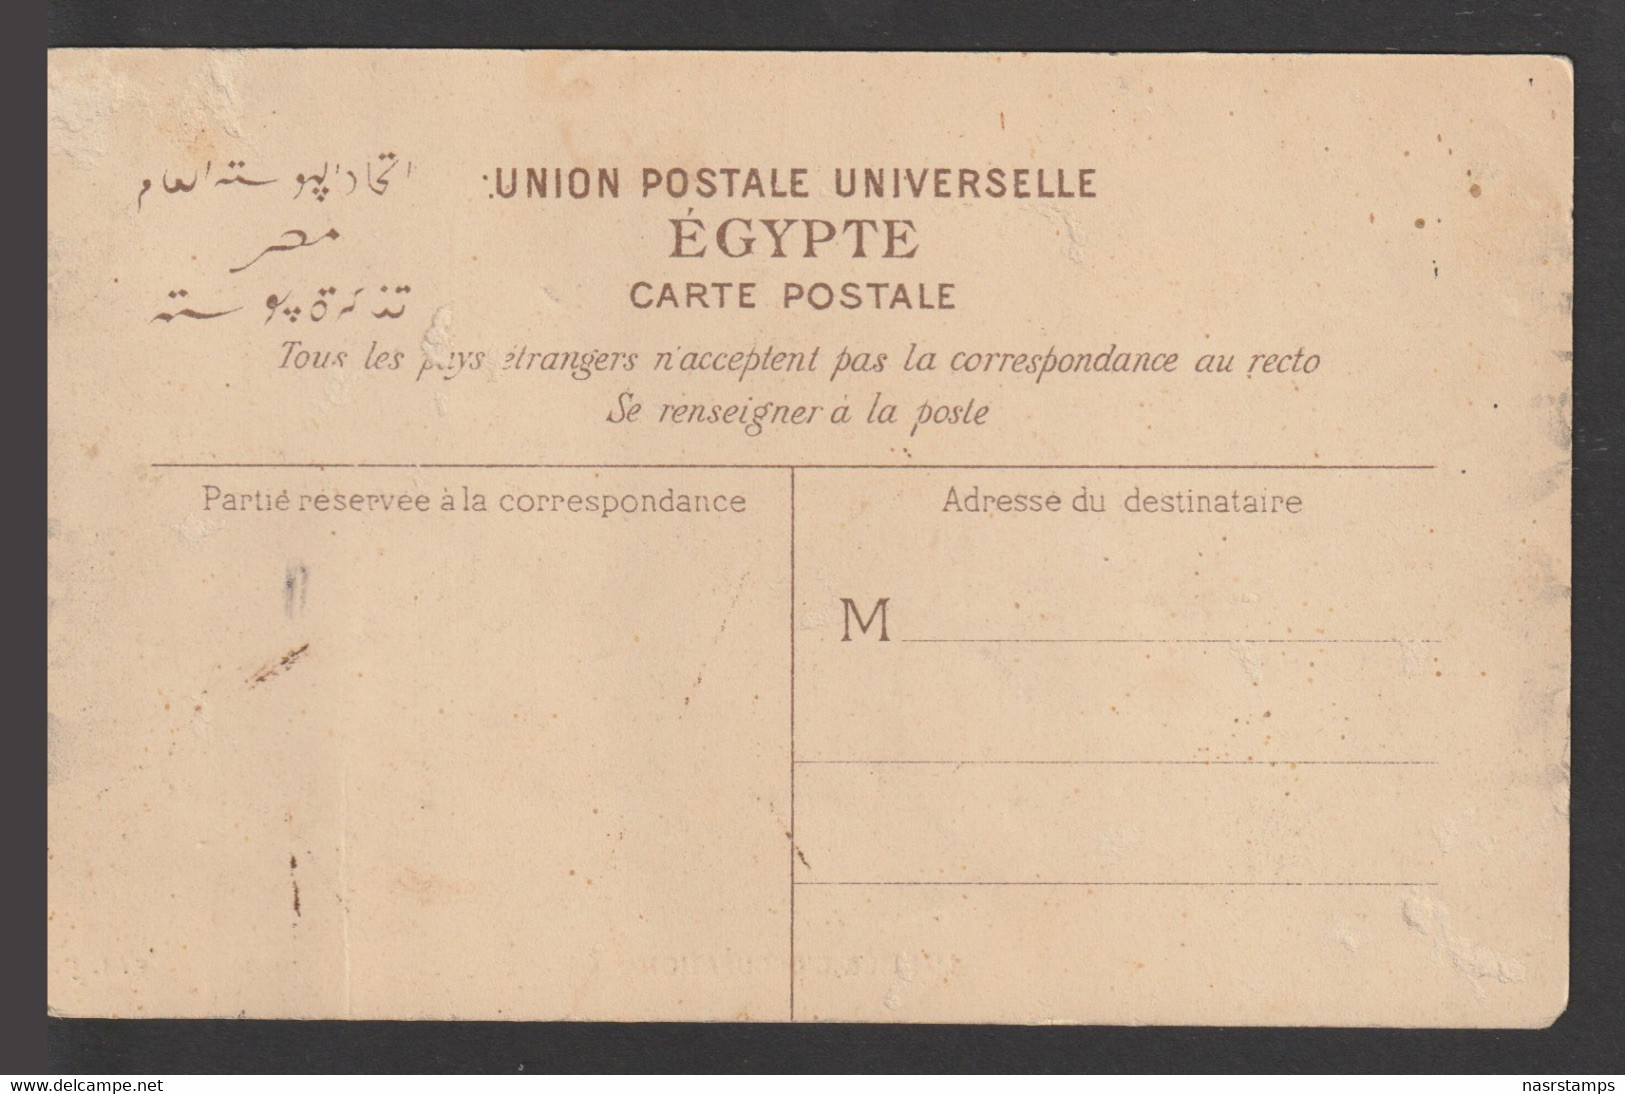 Egypt - Rare - Vintage Post Card - The Occupation Army In Egypt - 1866-1914 Ägypten Khediva